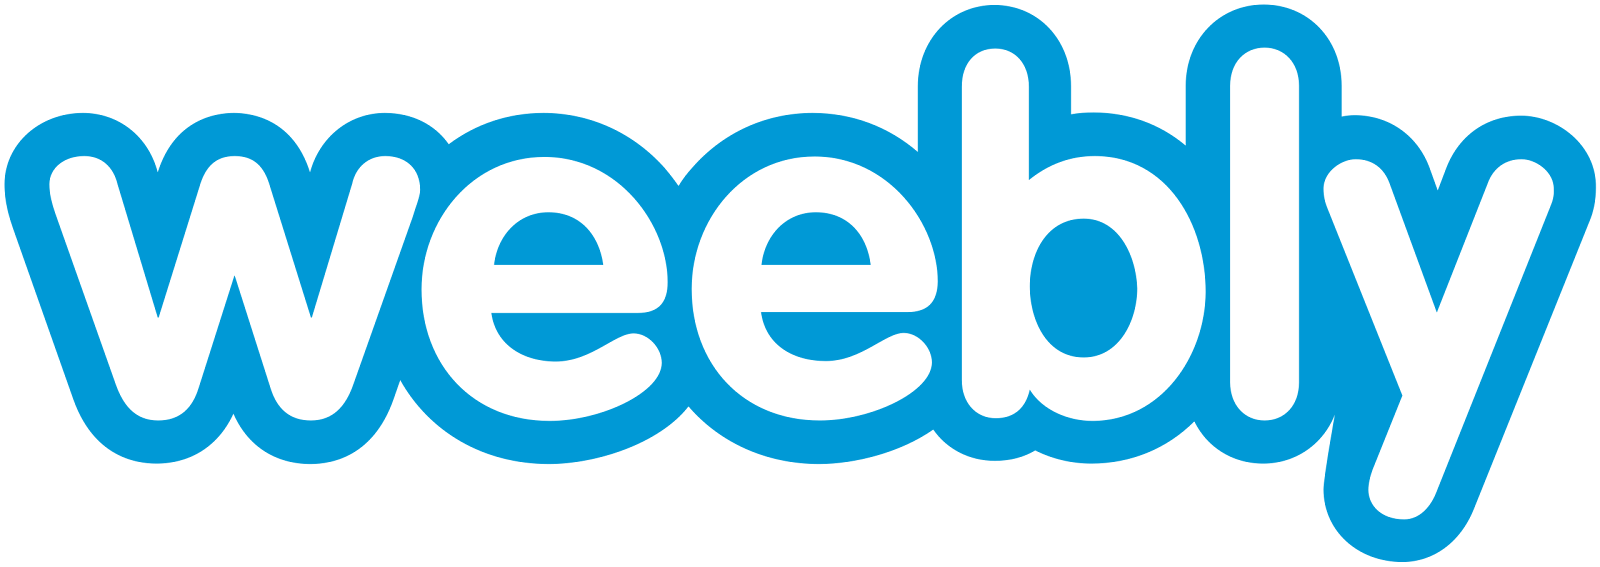 File:Weebly logo.svg - Wikimedia Commons